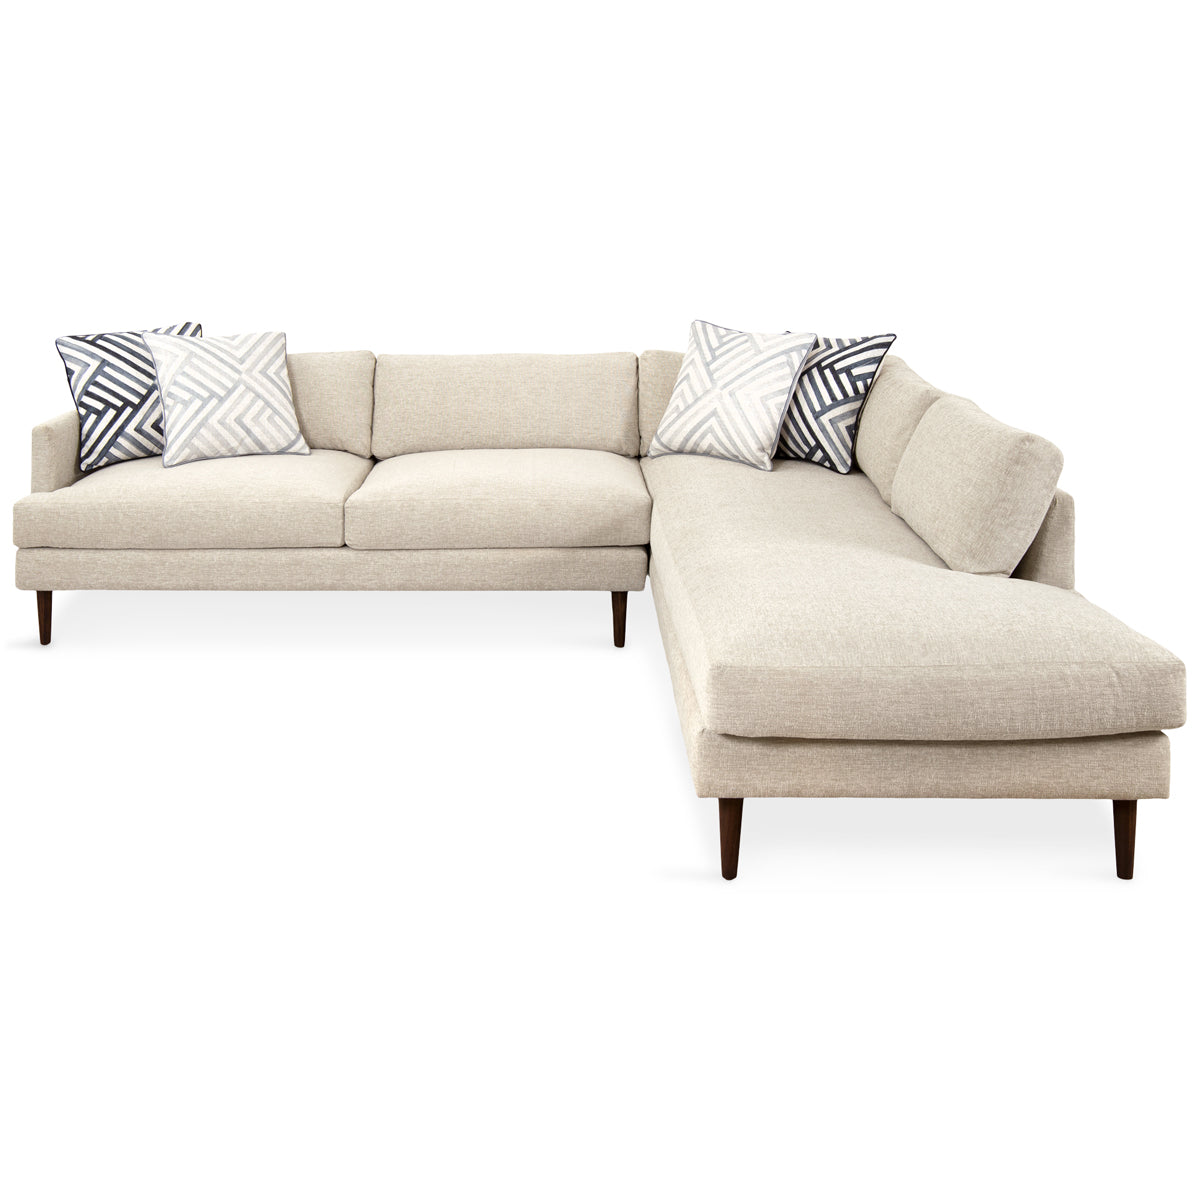 Slim Jim Sectional In Textured Fabric - ModShop1.com